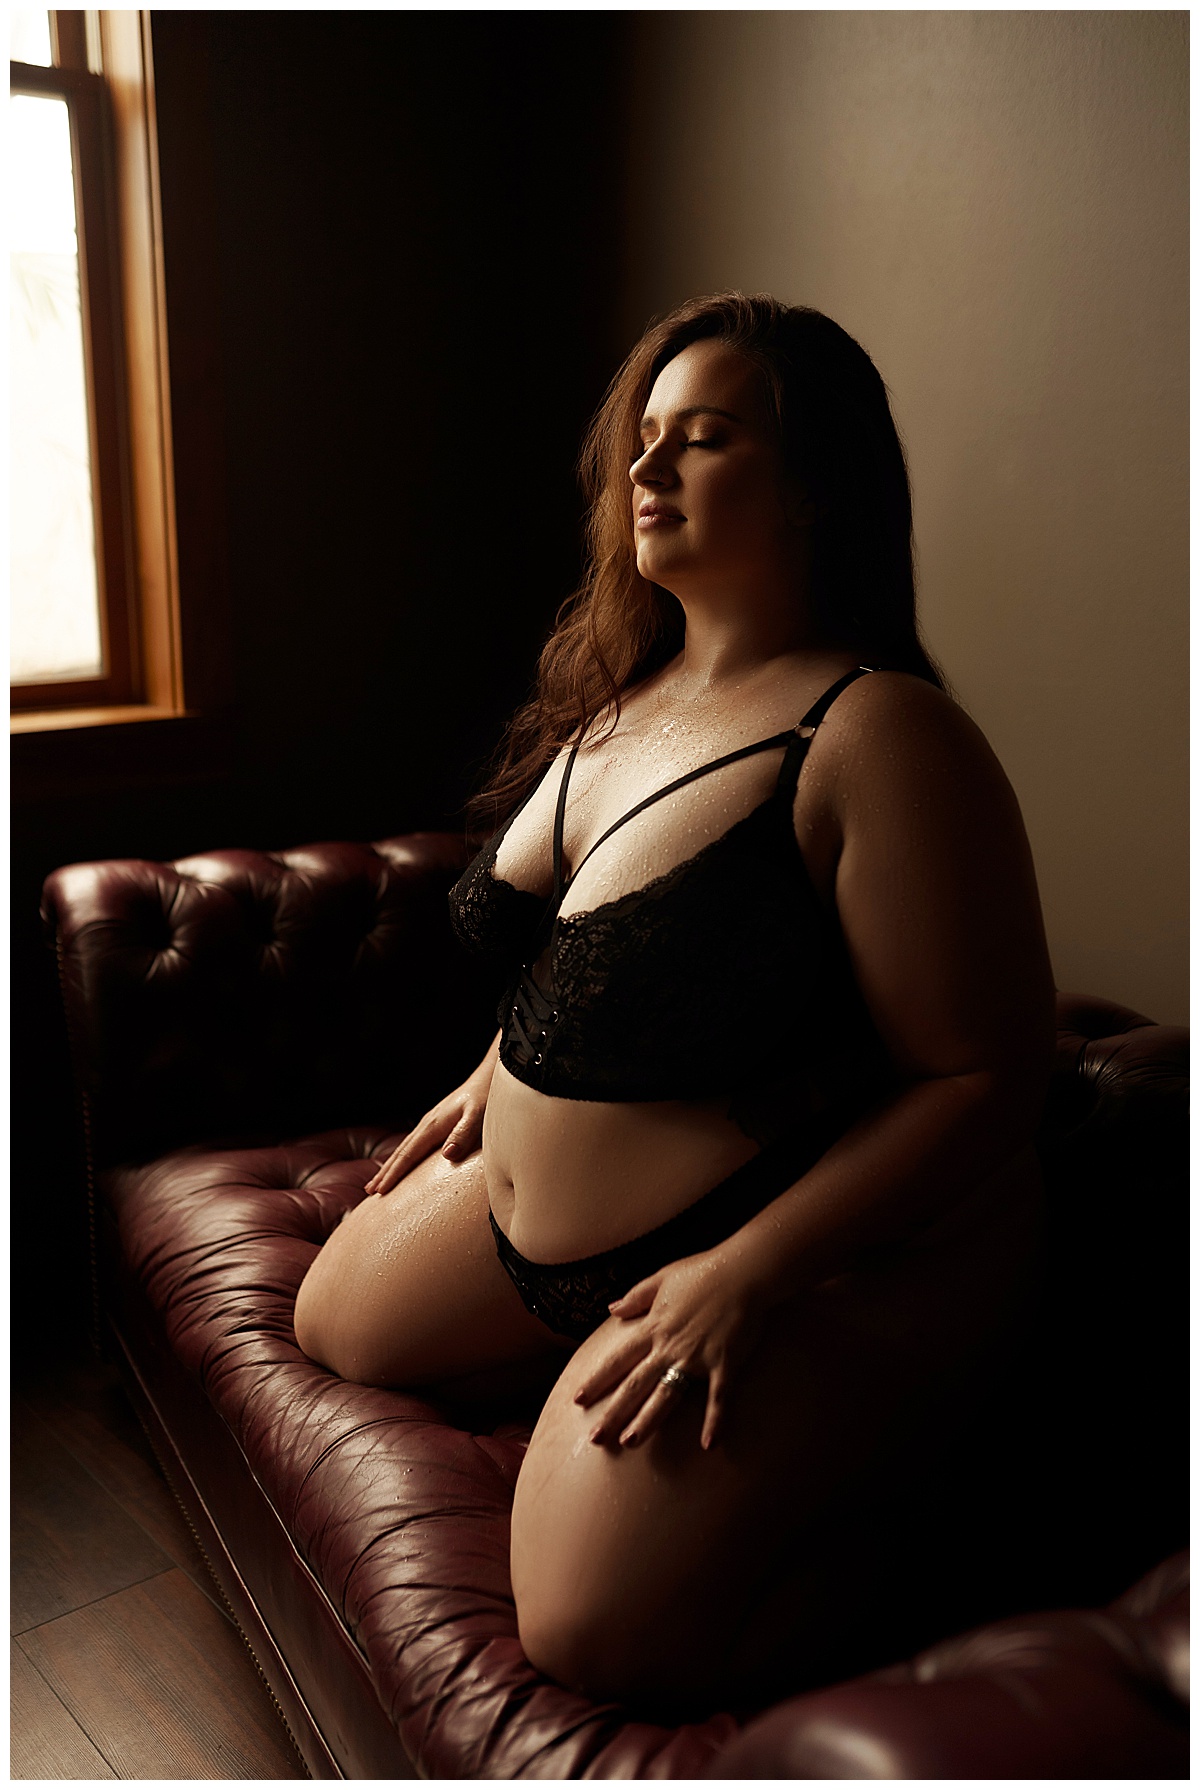 Female kneel son the ouch in lingerie for Emma Christine Photography